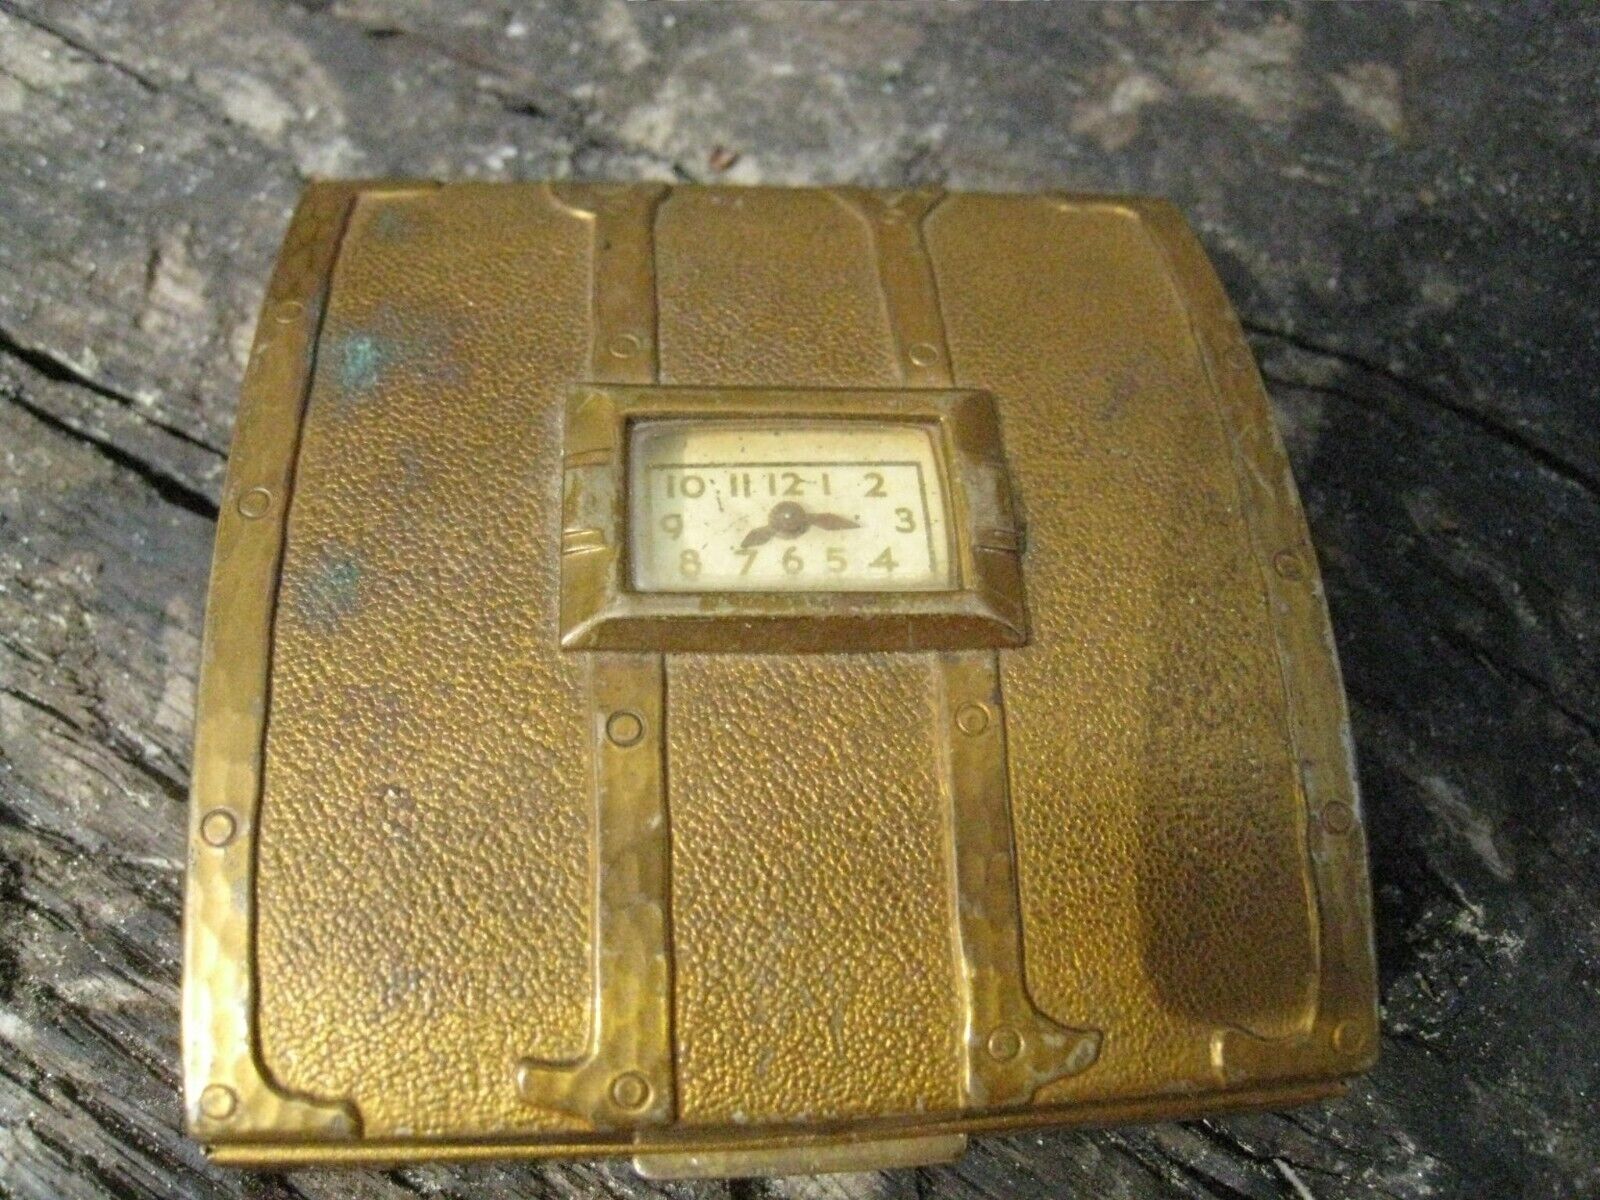 Evans Treasure Chest Compact With E. Ingraham Co. Clock untested light wear